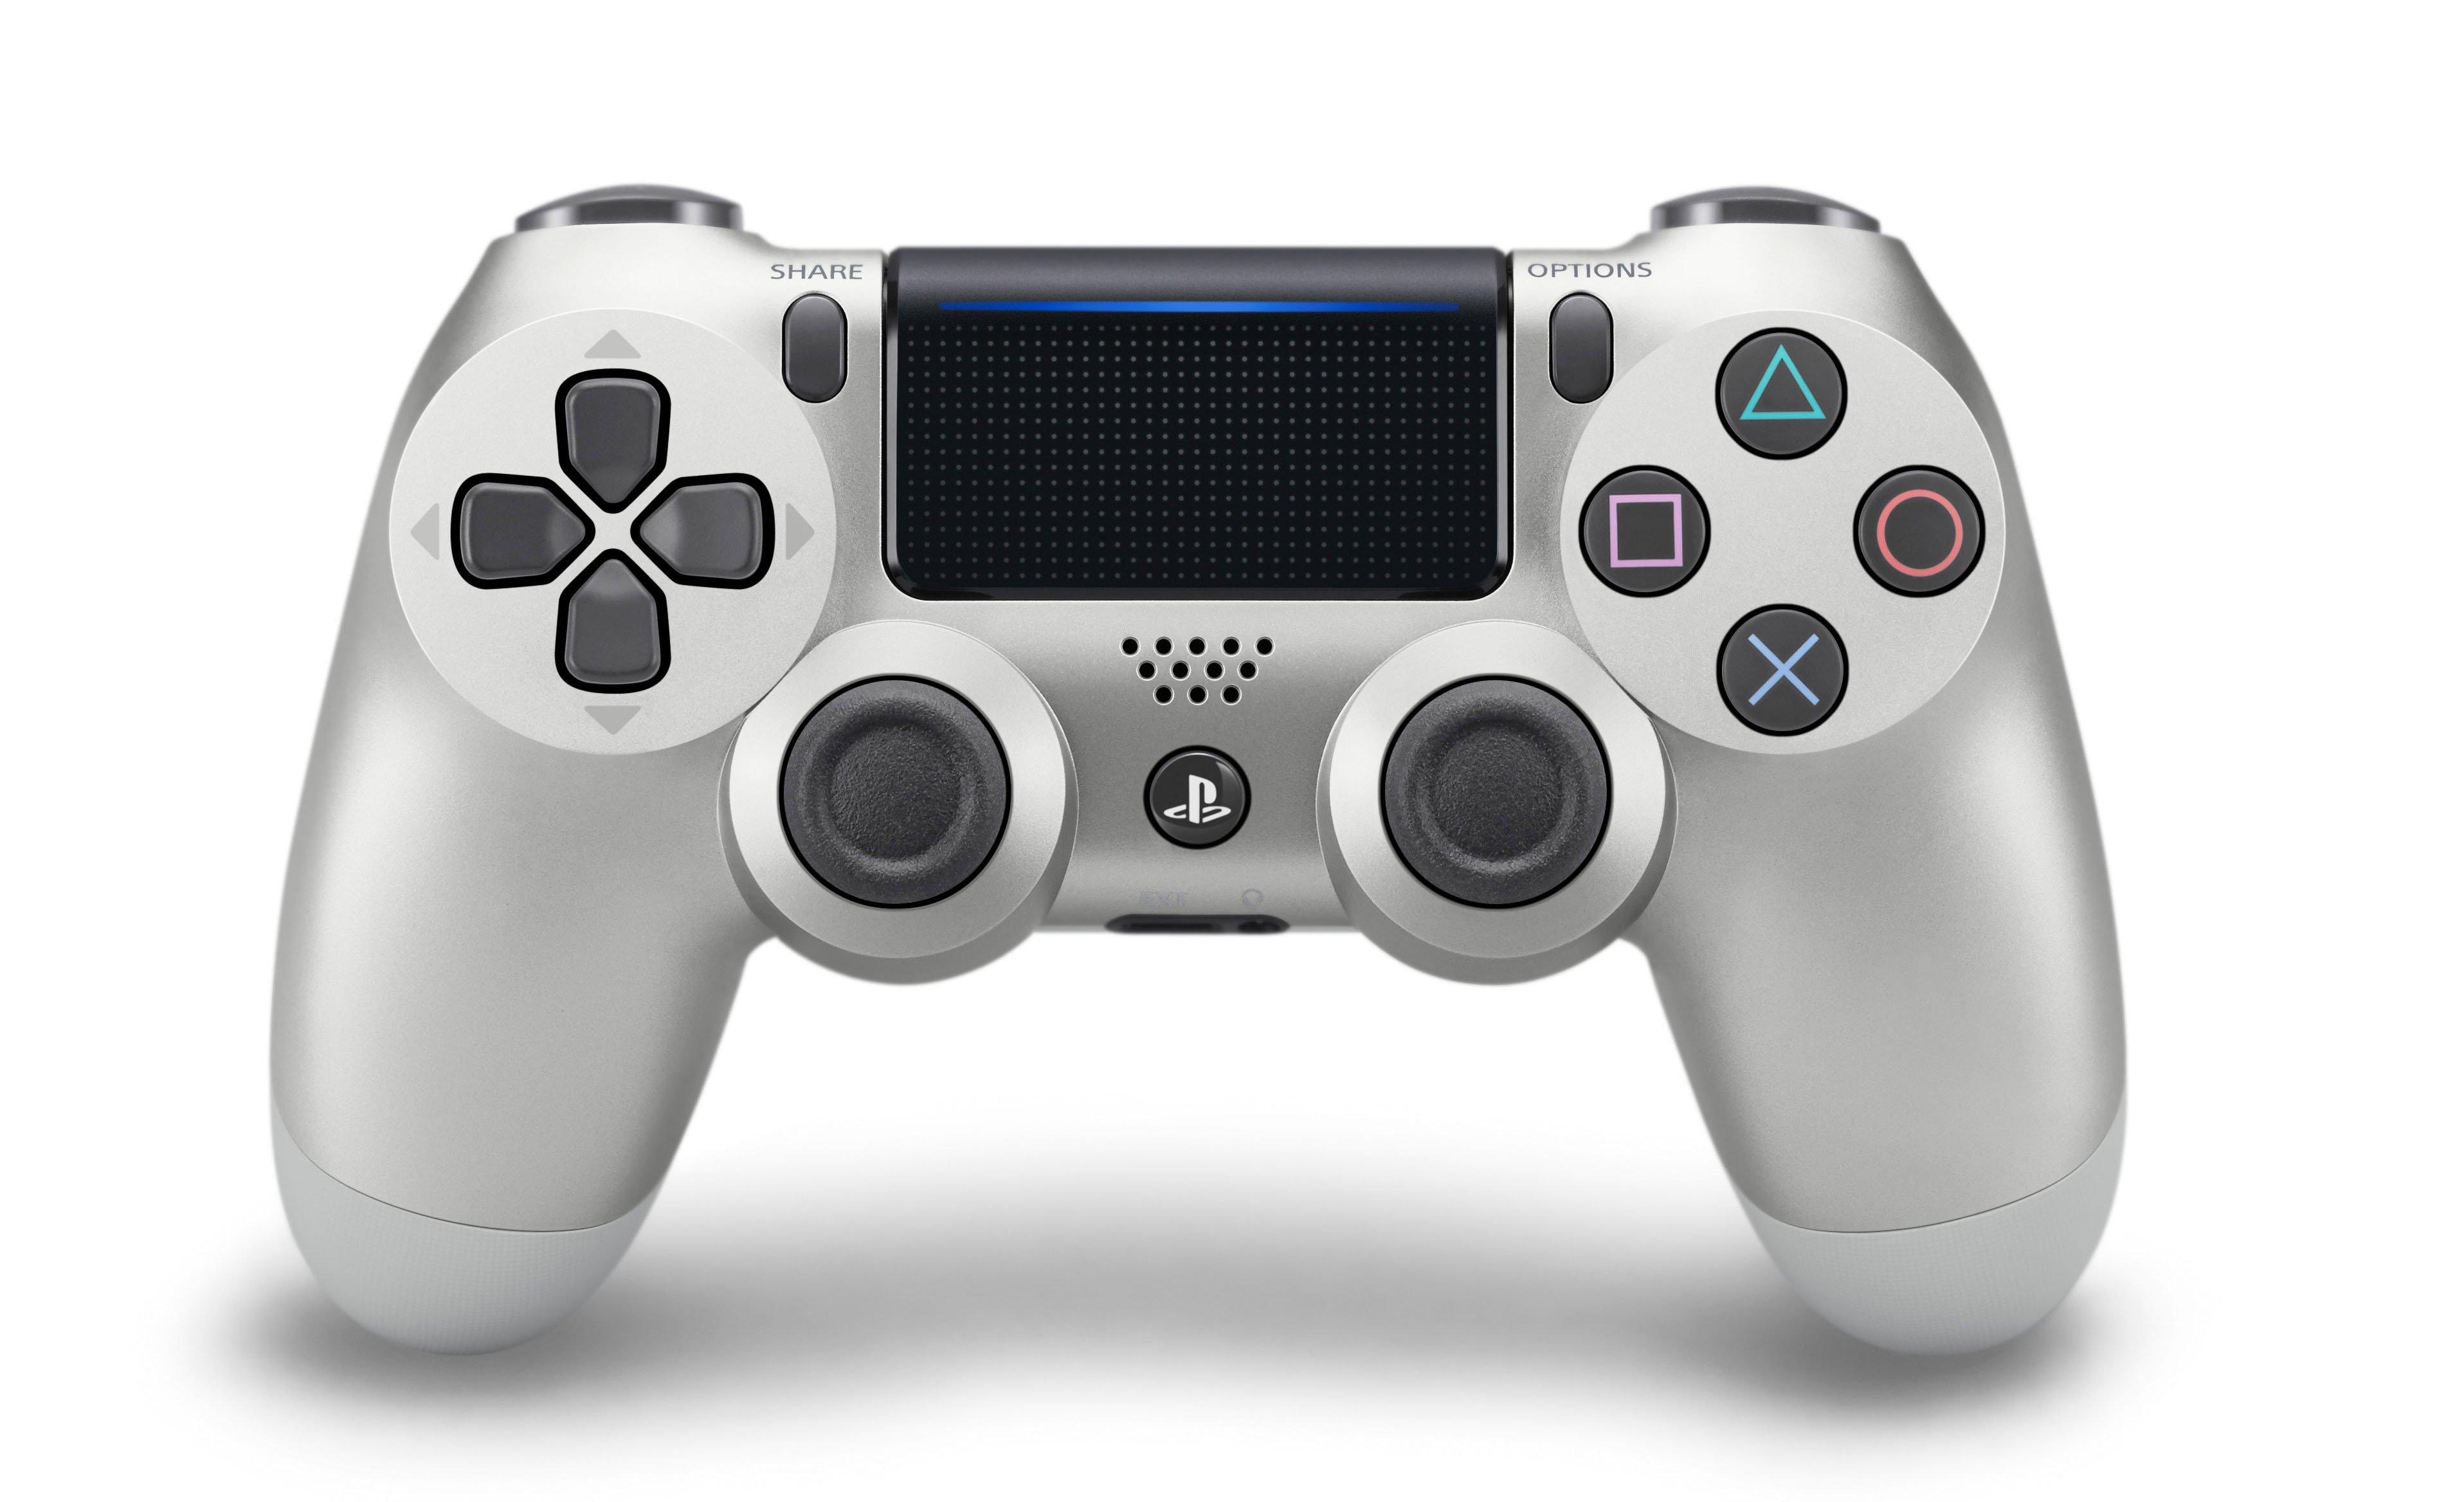 Sony DUALSHOCK 4 Wireless Controller for PlayStation 4 - Silver